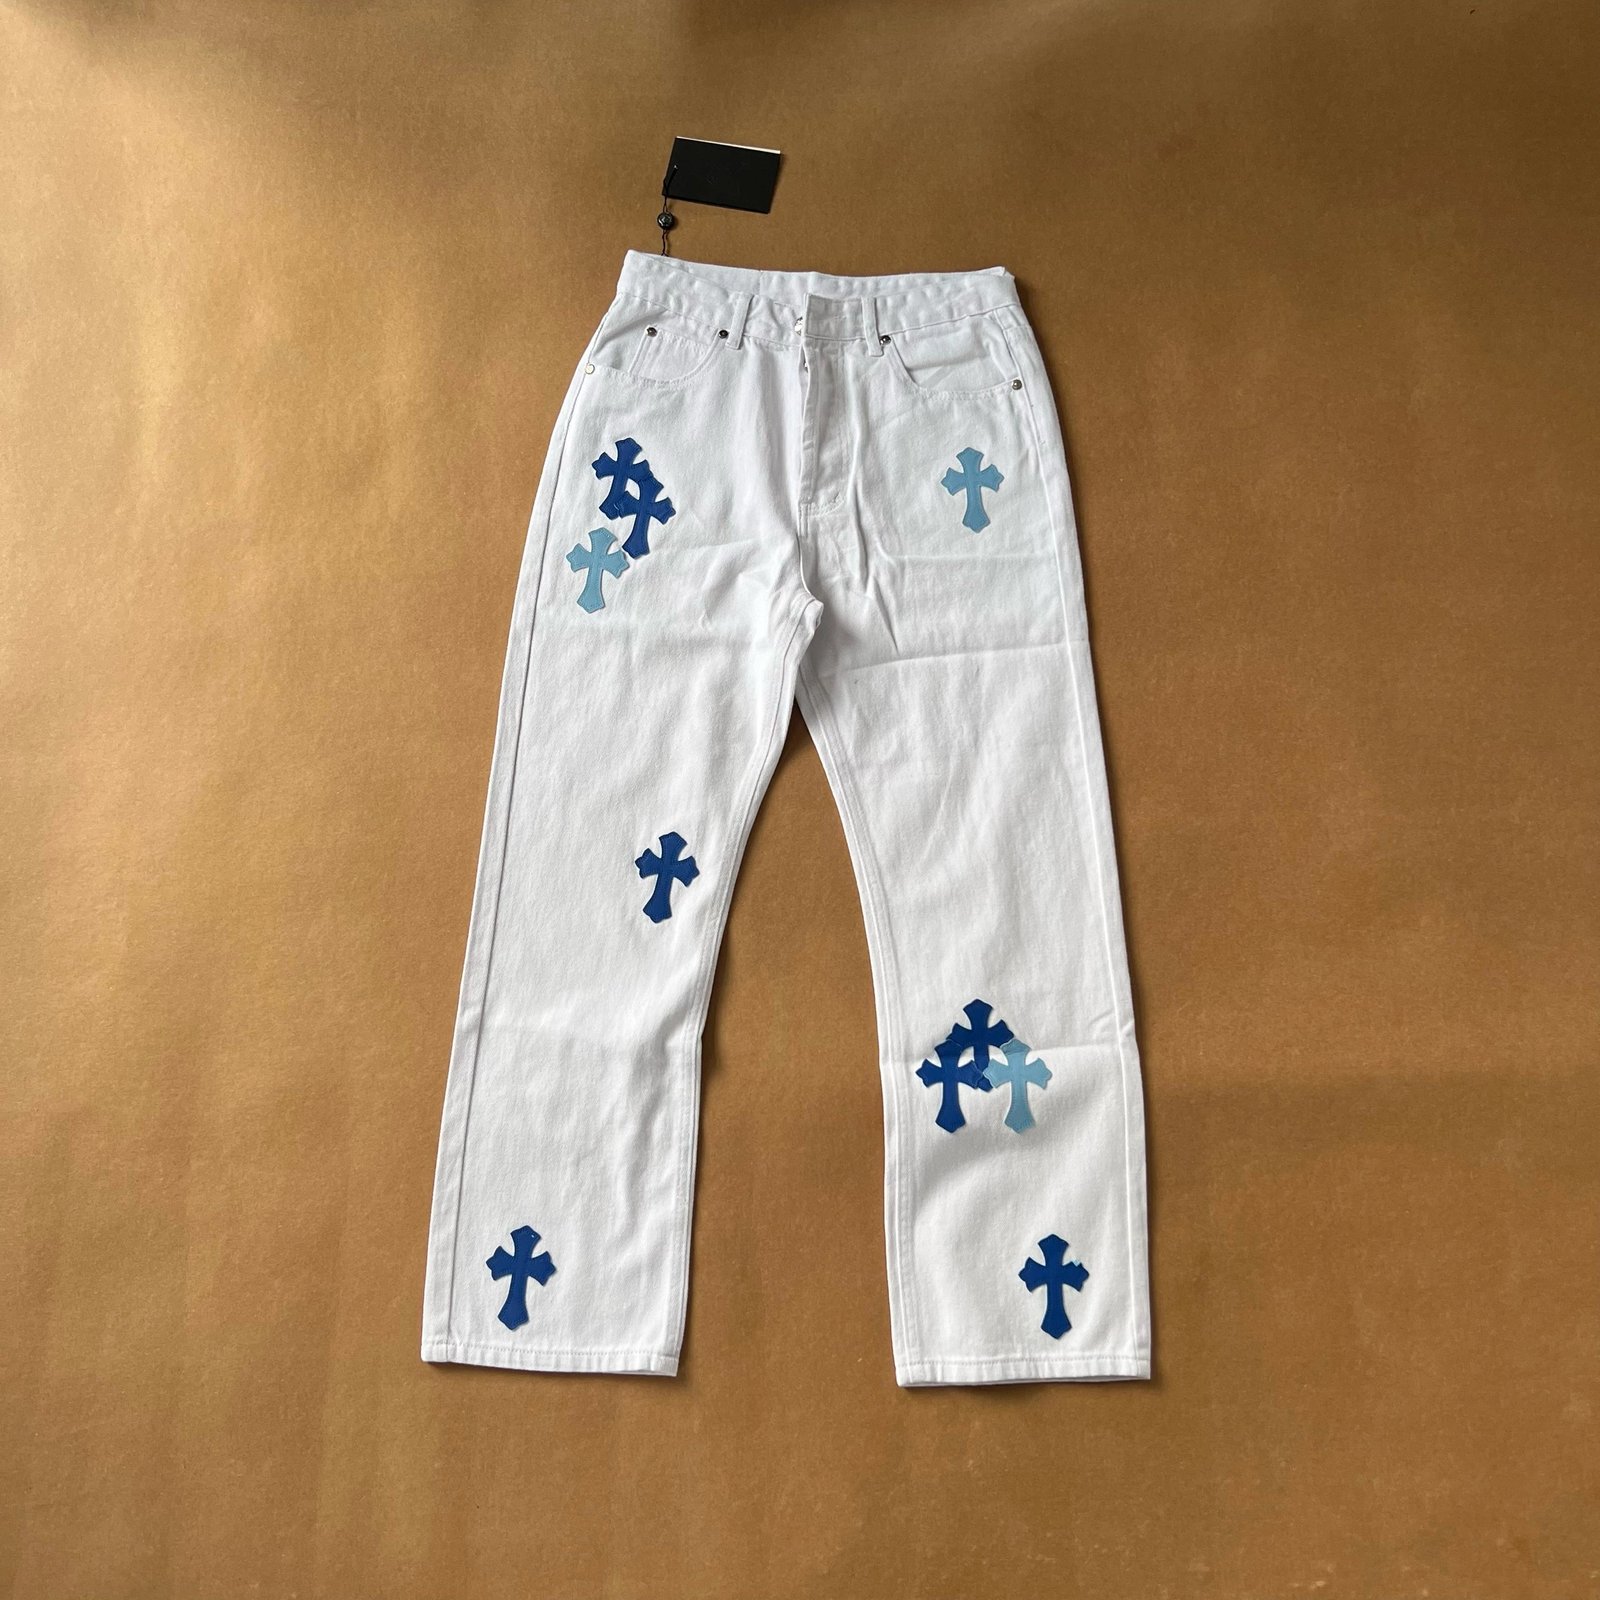 Chrome Heart Jeans - PandaBuyProducts